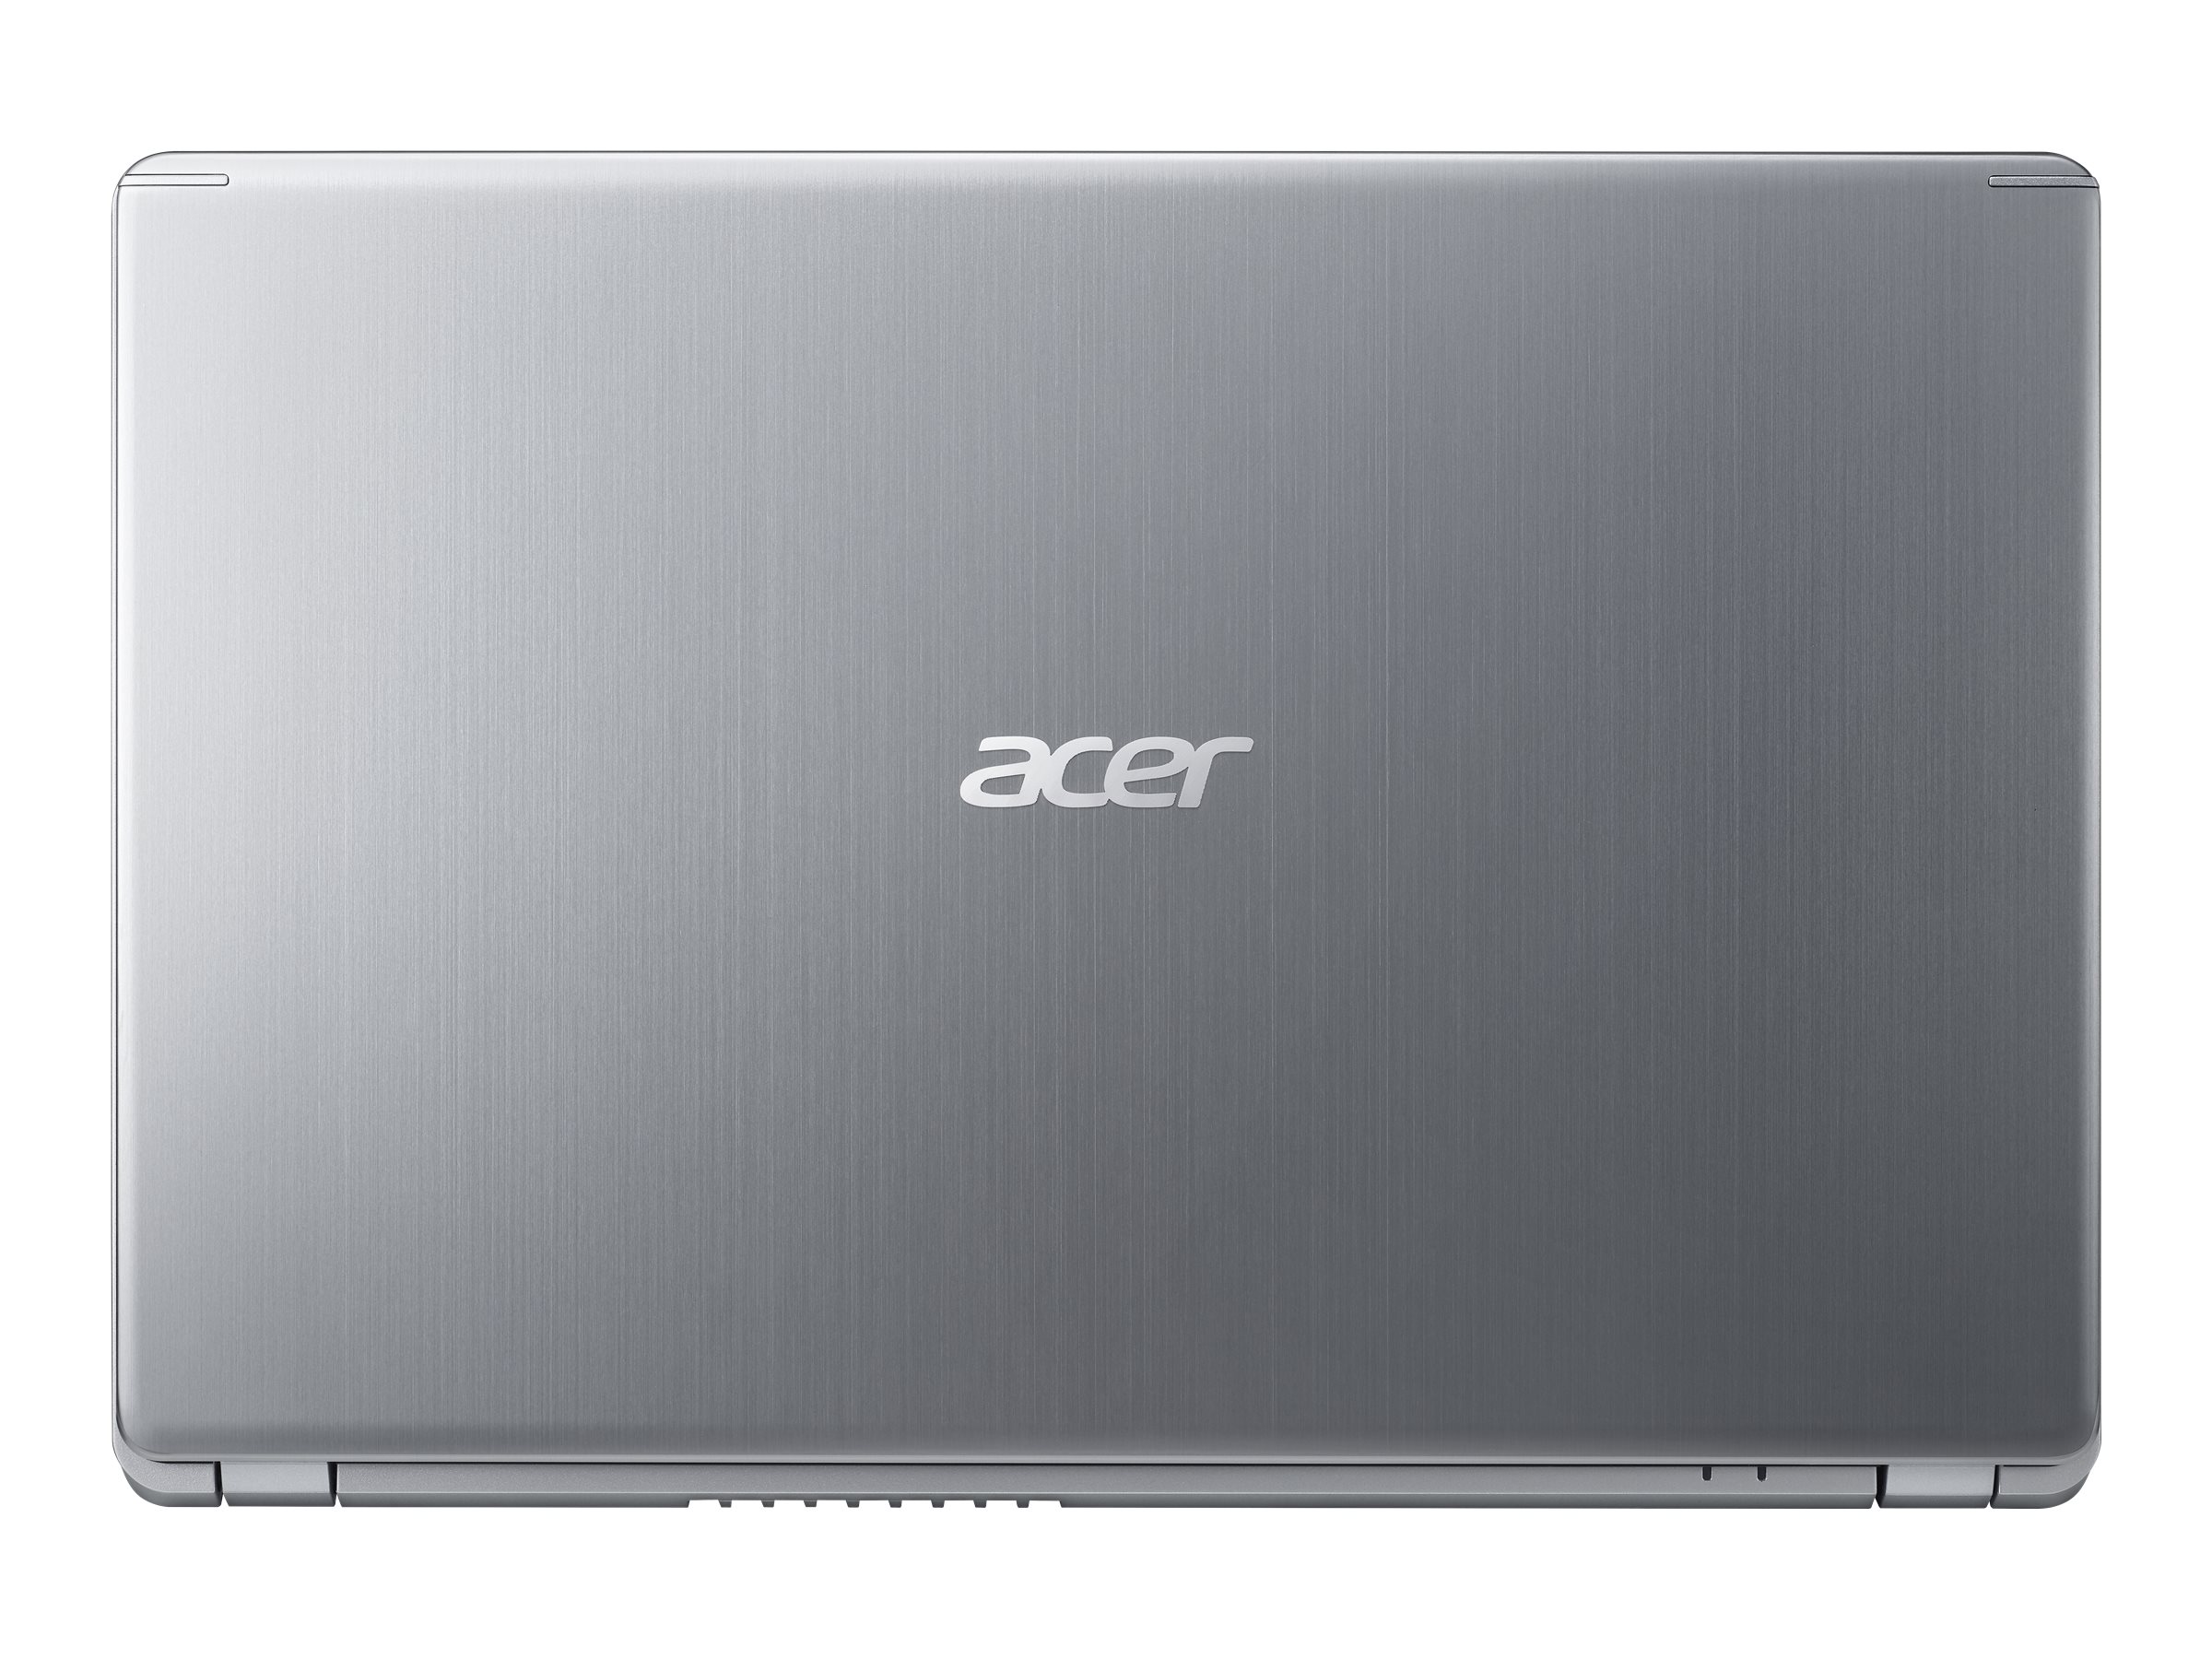 Acer A515-43-R19L 15.6 in. Aspire 5 Slim Laptop Full HD IPS Display Laptop - Silver - image 2 of 7